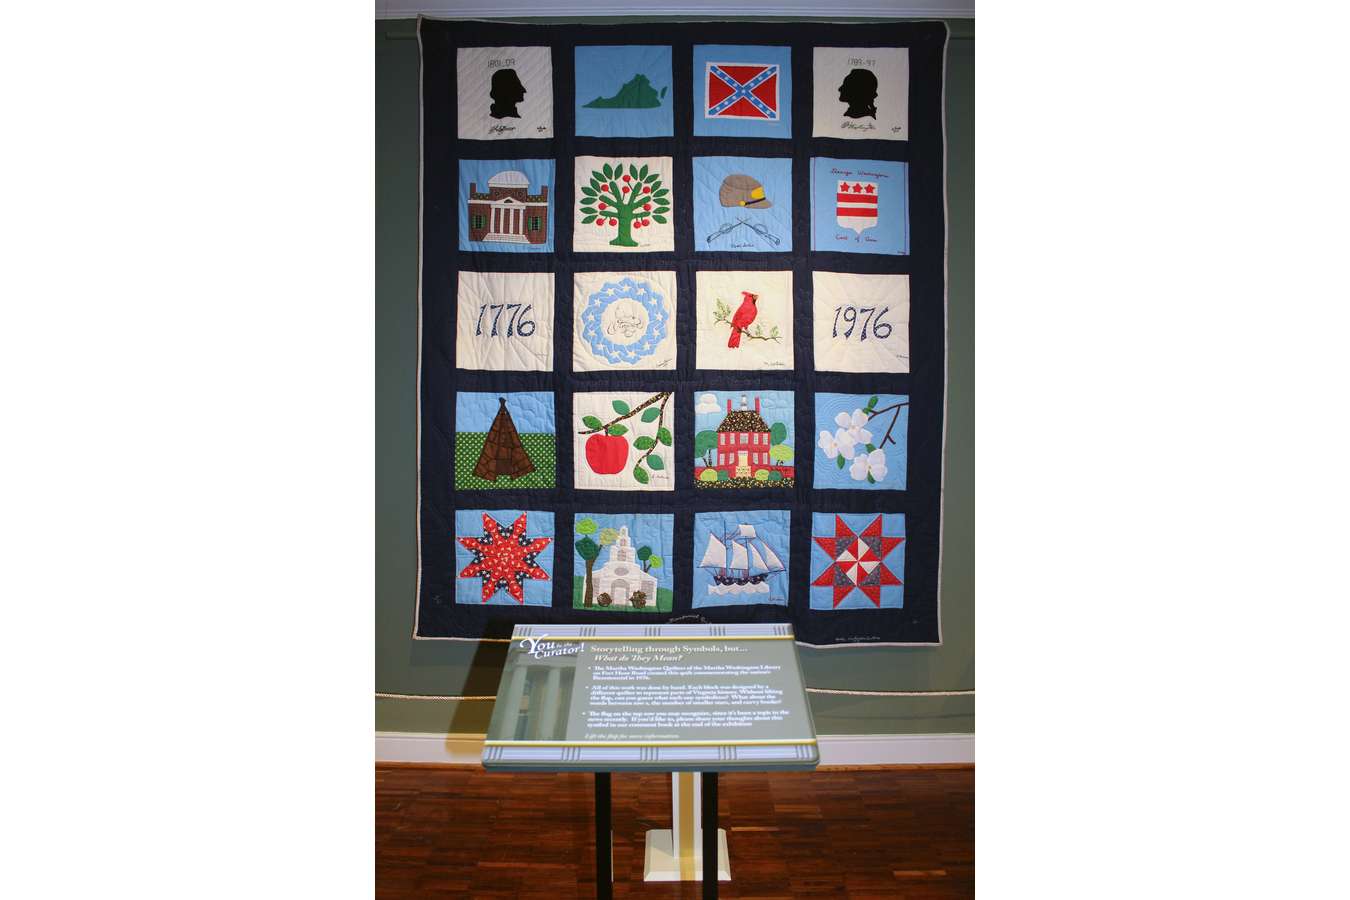 8a Lycem Quilt 4579 : Bicentennial Quilt gift of the Martha Washington Library completed in 1976 for the nation's bicentennial 